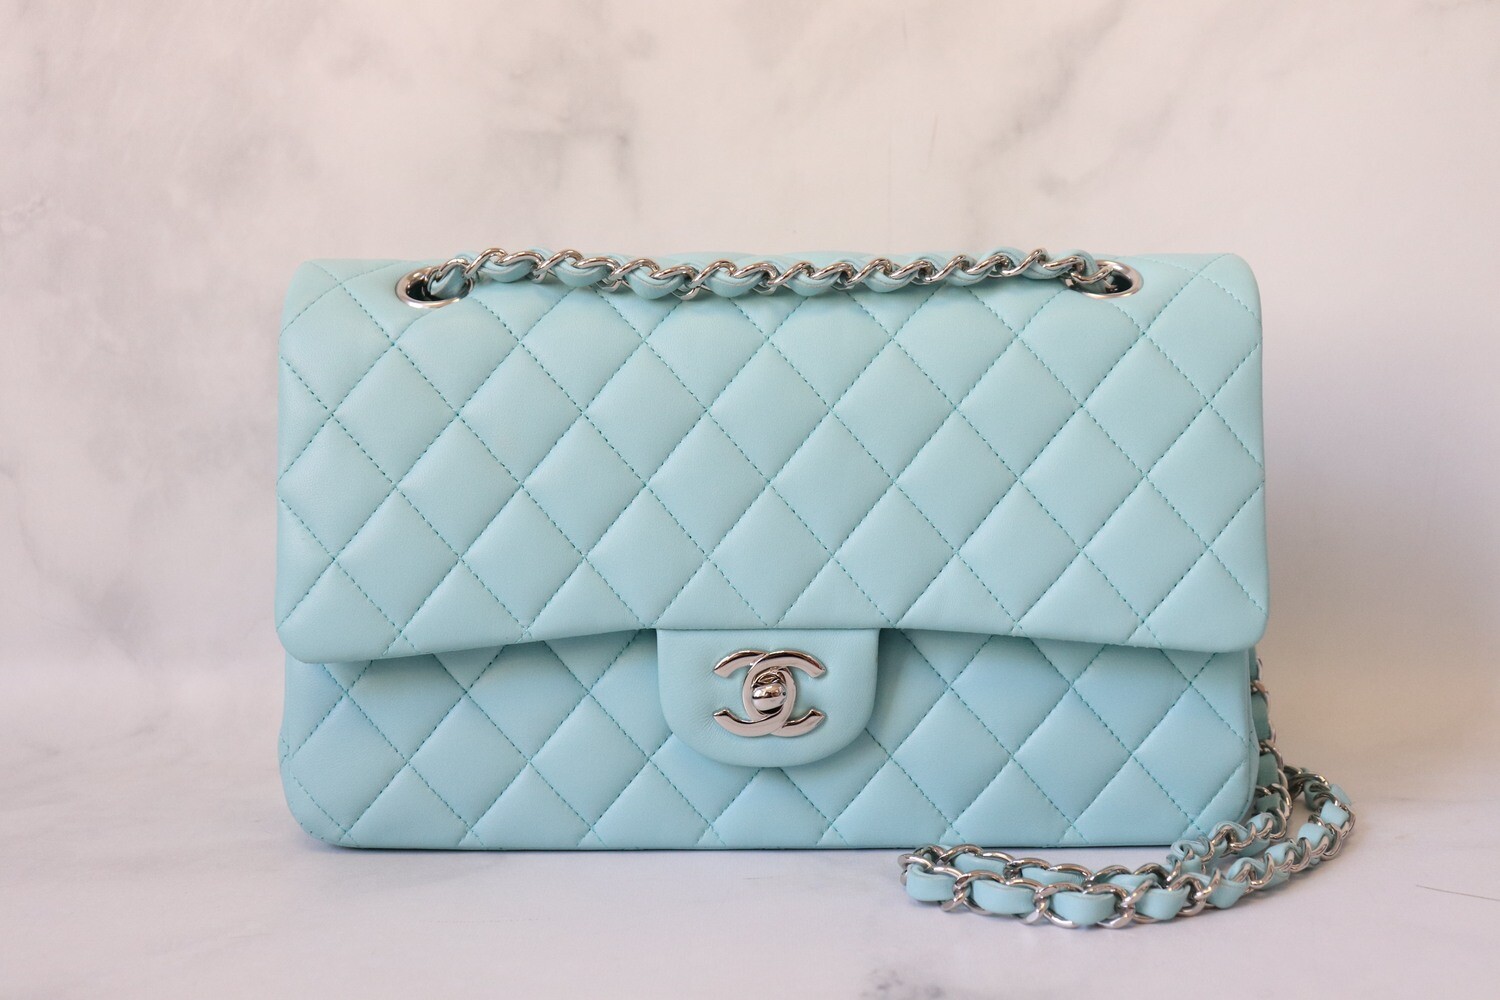 Chanel Classic Medium Double Flap 19C, Light Tiffany Blue Lambskin Leather  with Silver Hardware, Preowned in Box - Julia Rose Boston | Shop